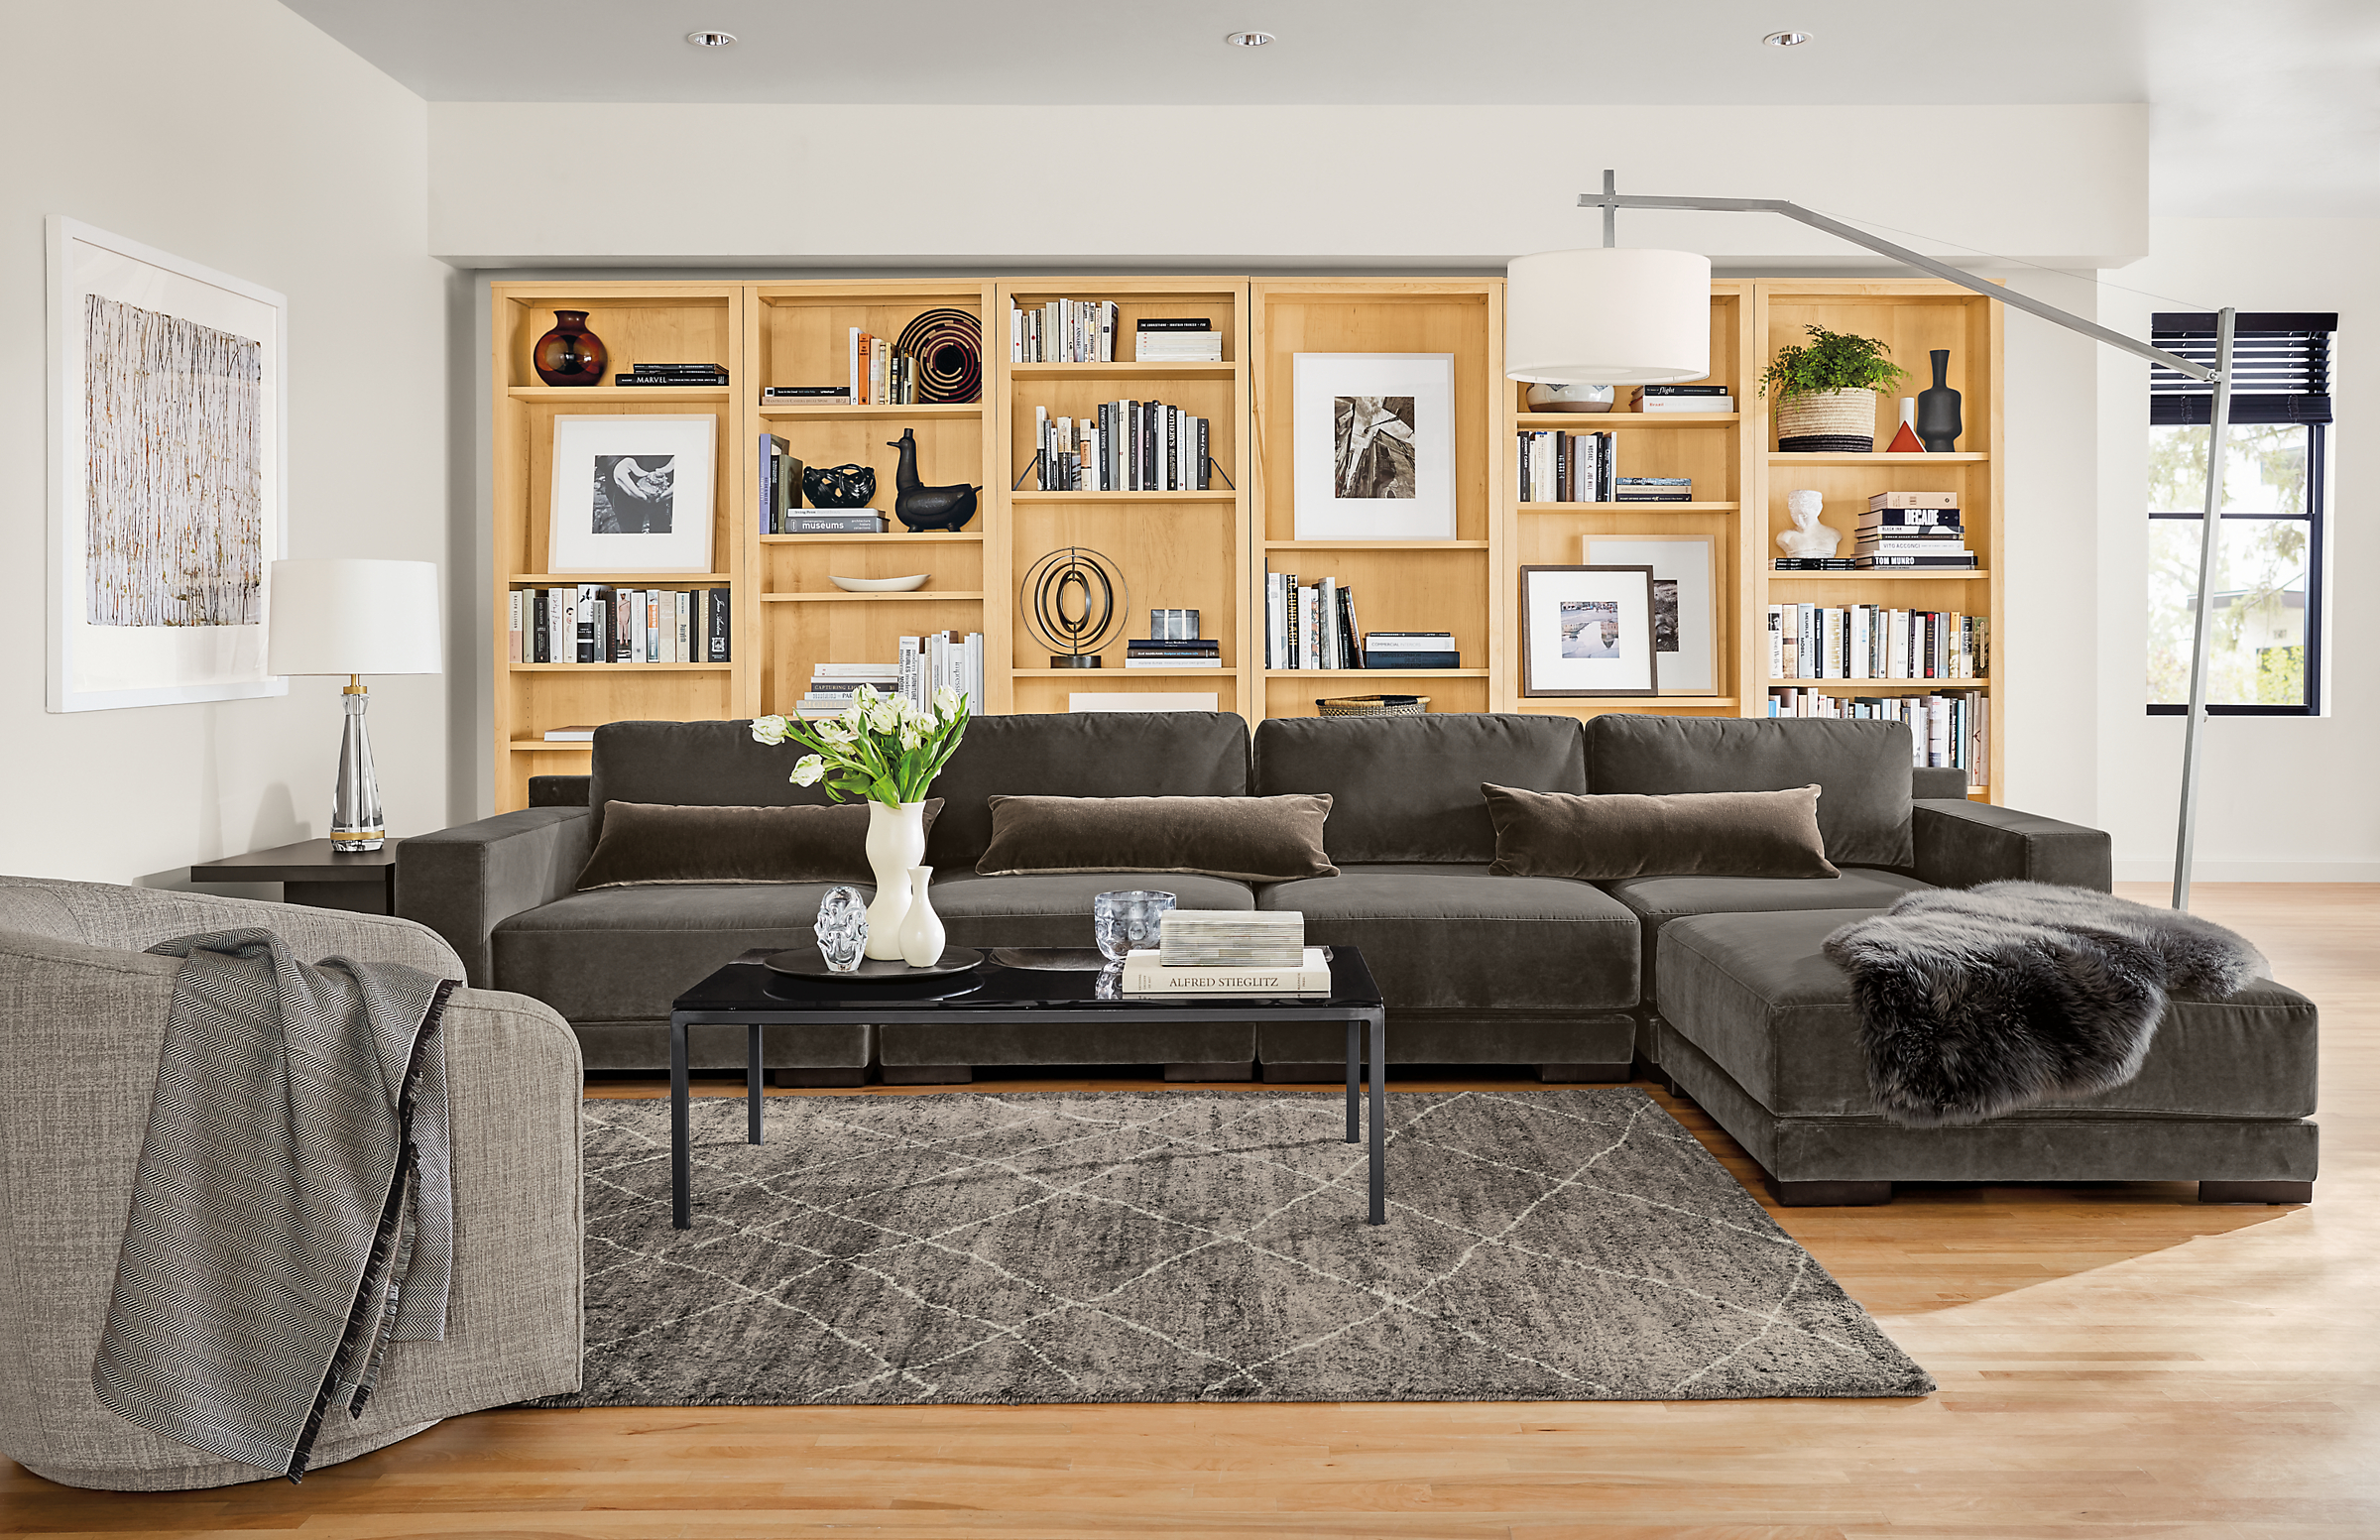 Detail of Mira 5-piece modular sectional in living room with woodwind bookcases in white oak.